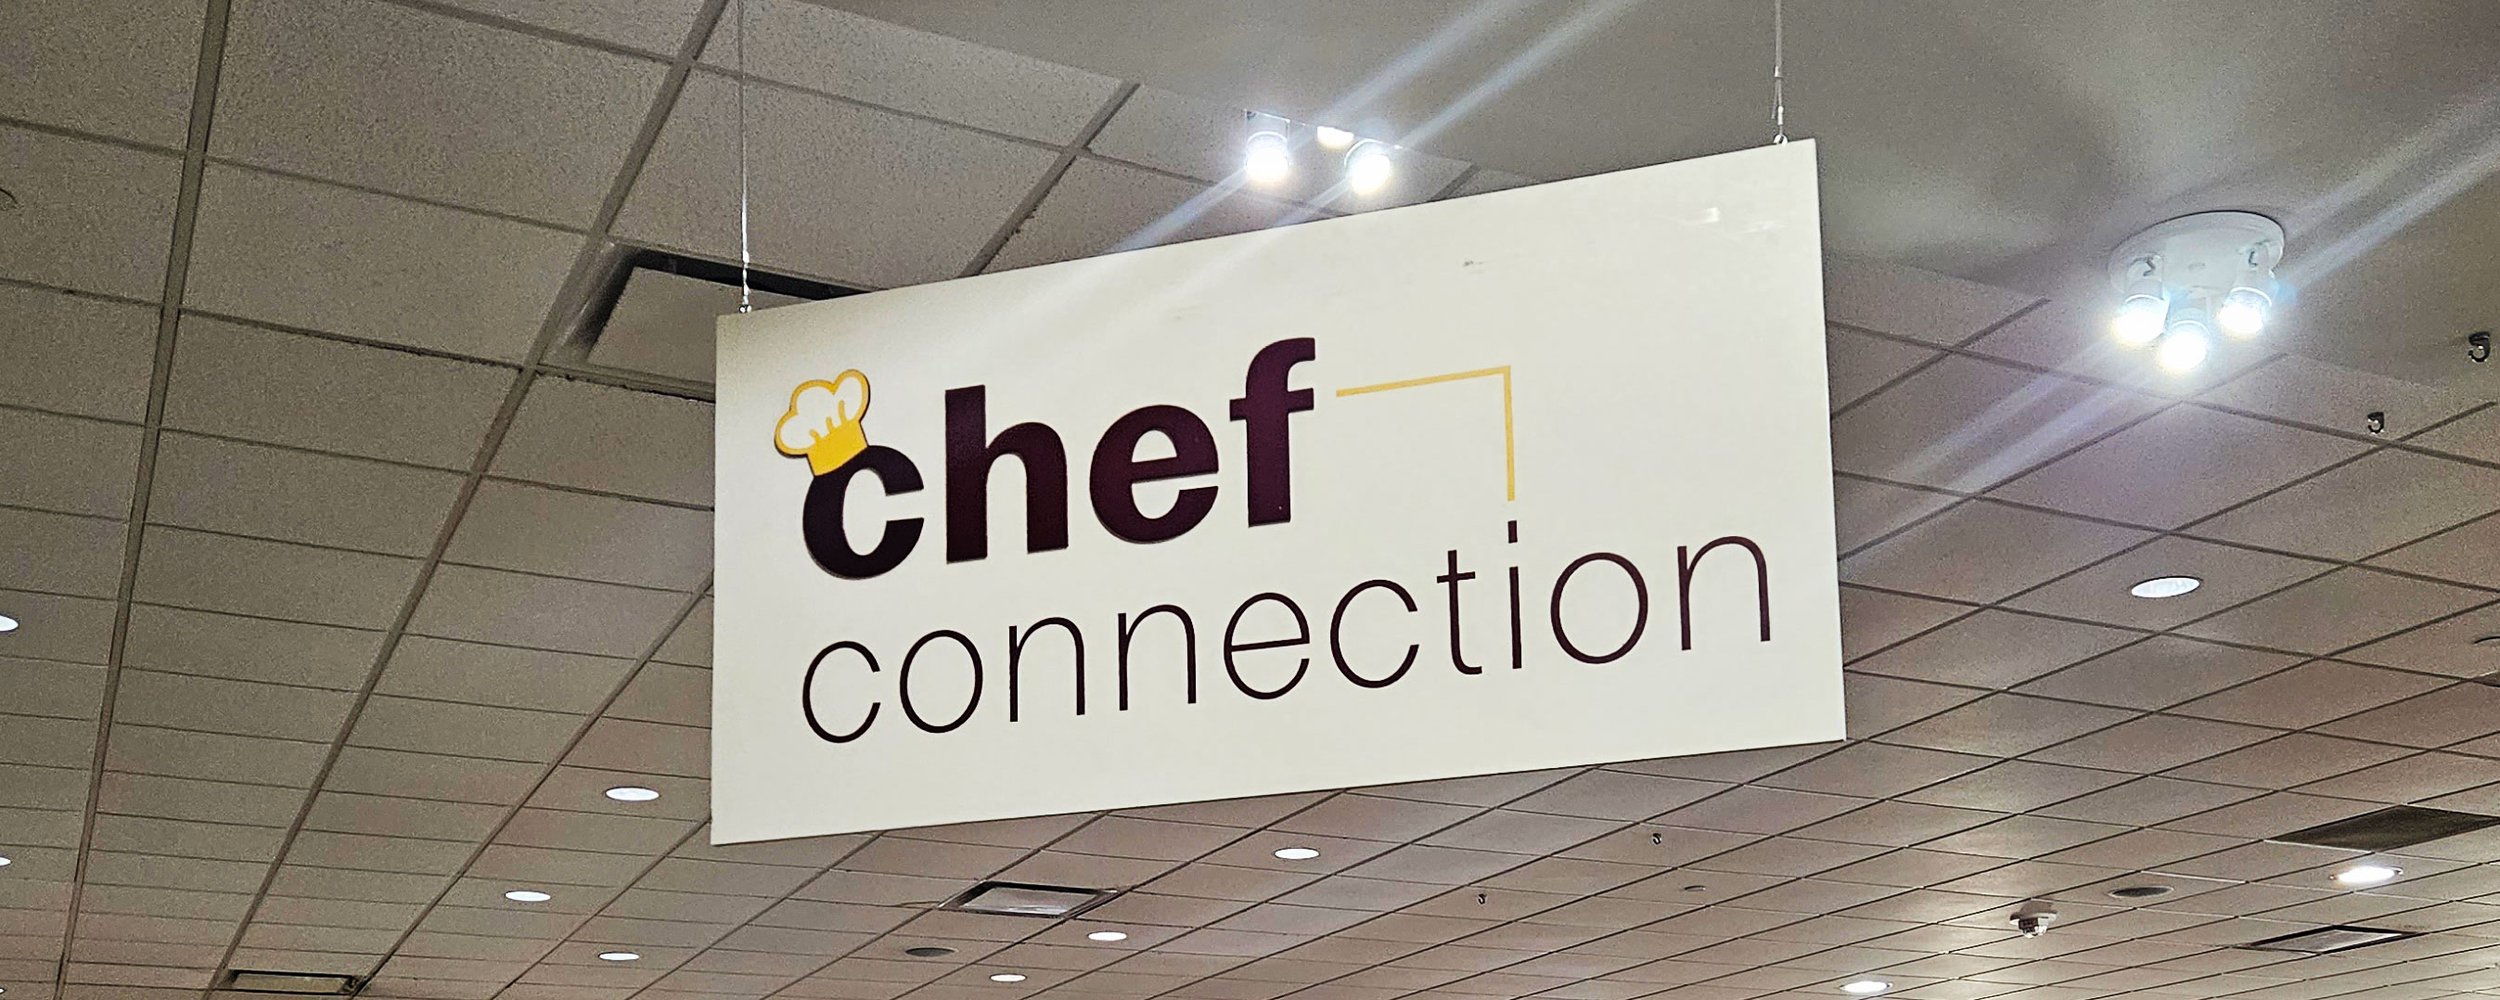 chefconnect-indoorsigns.jpg